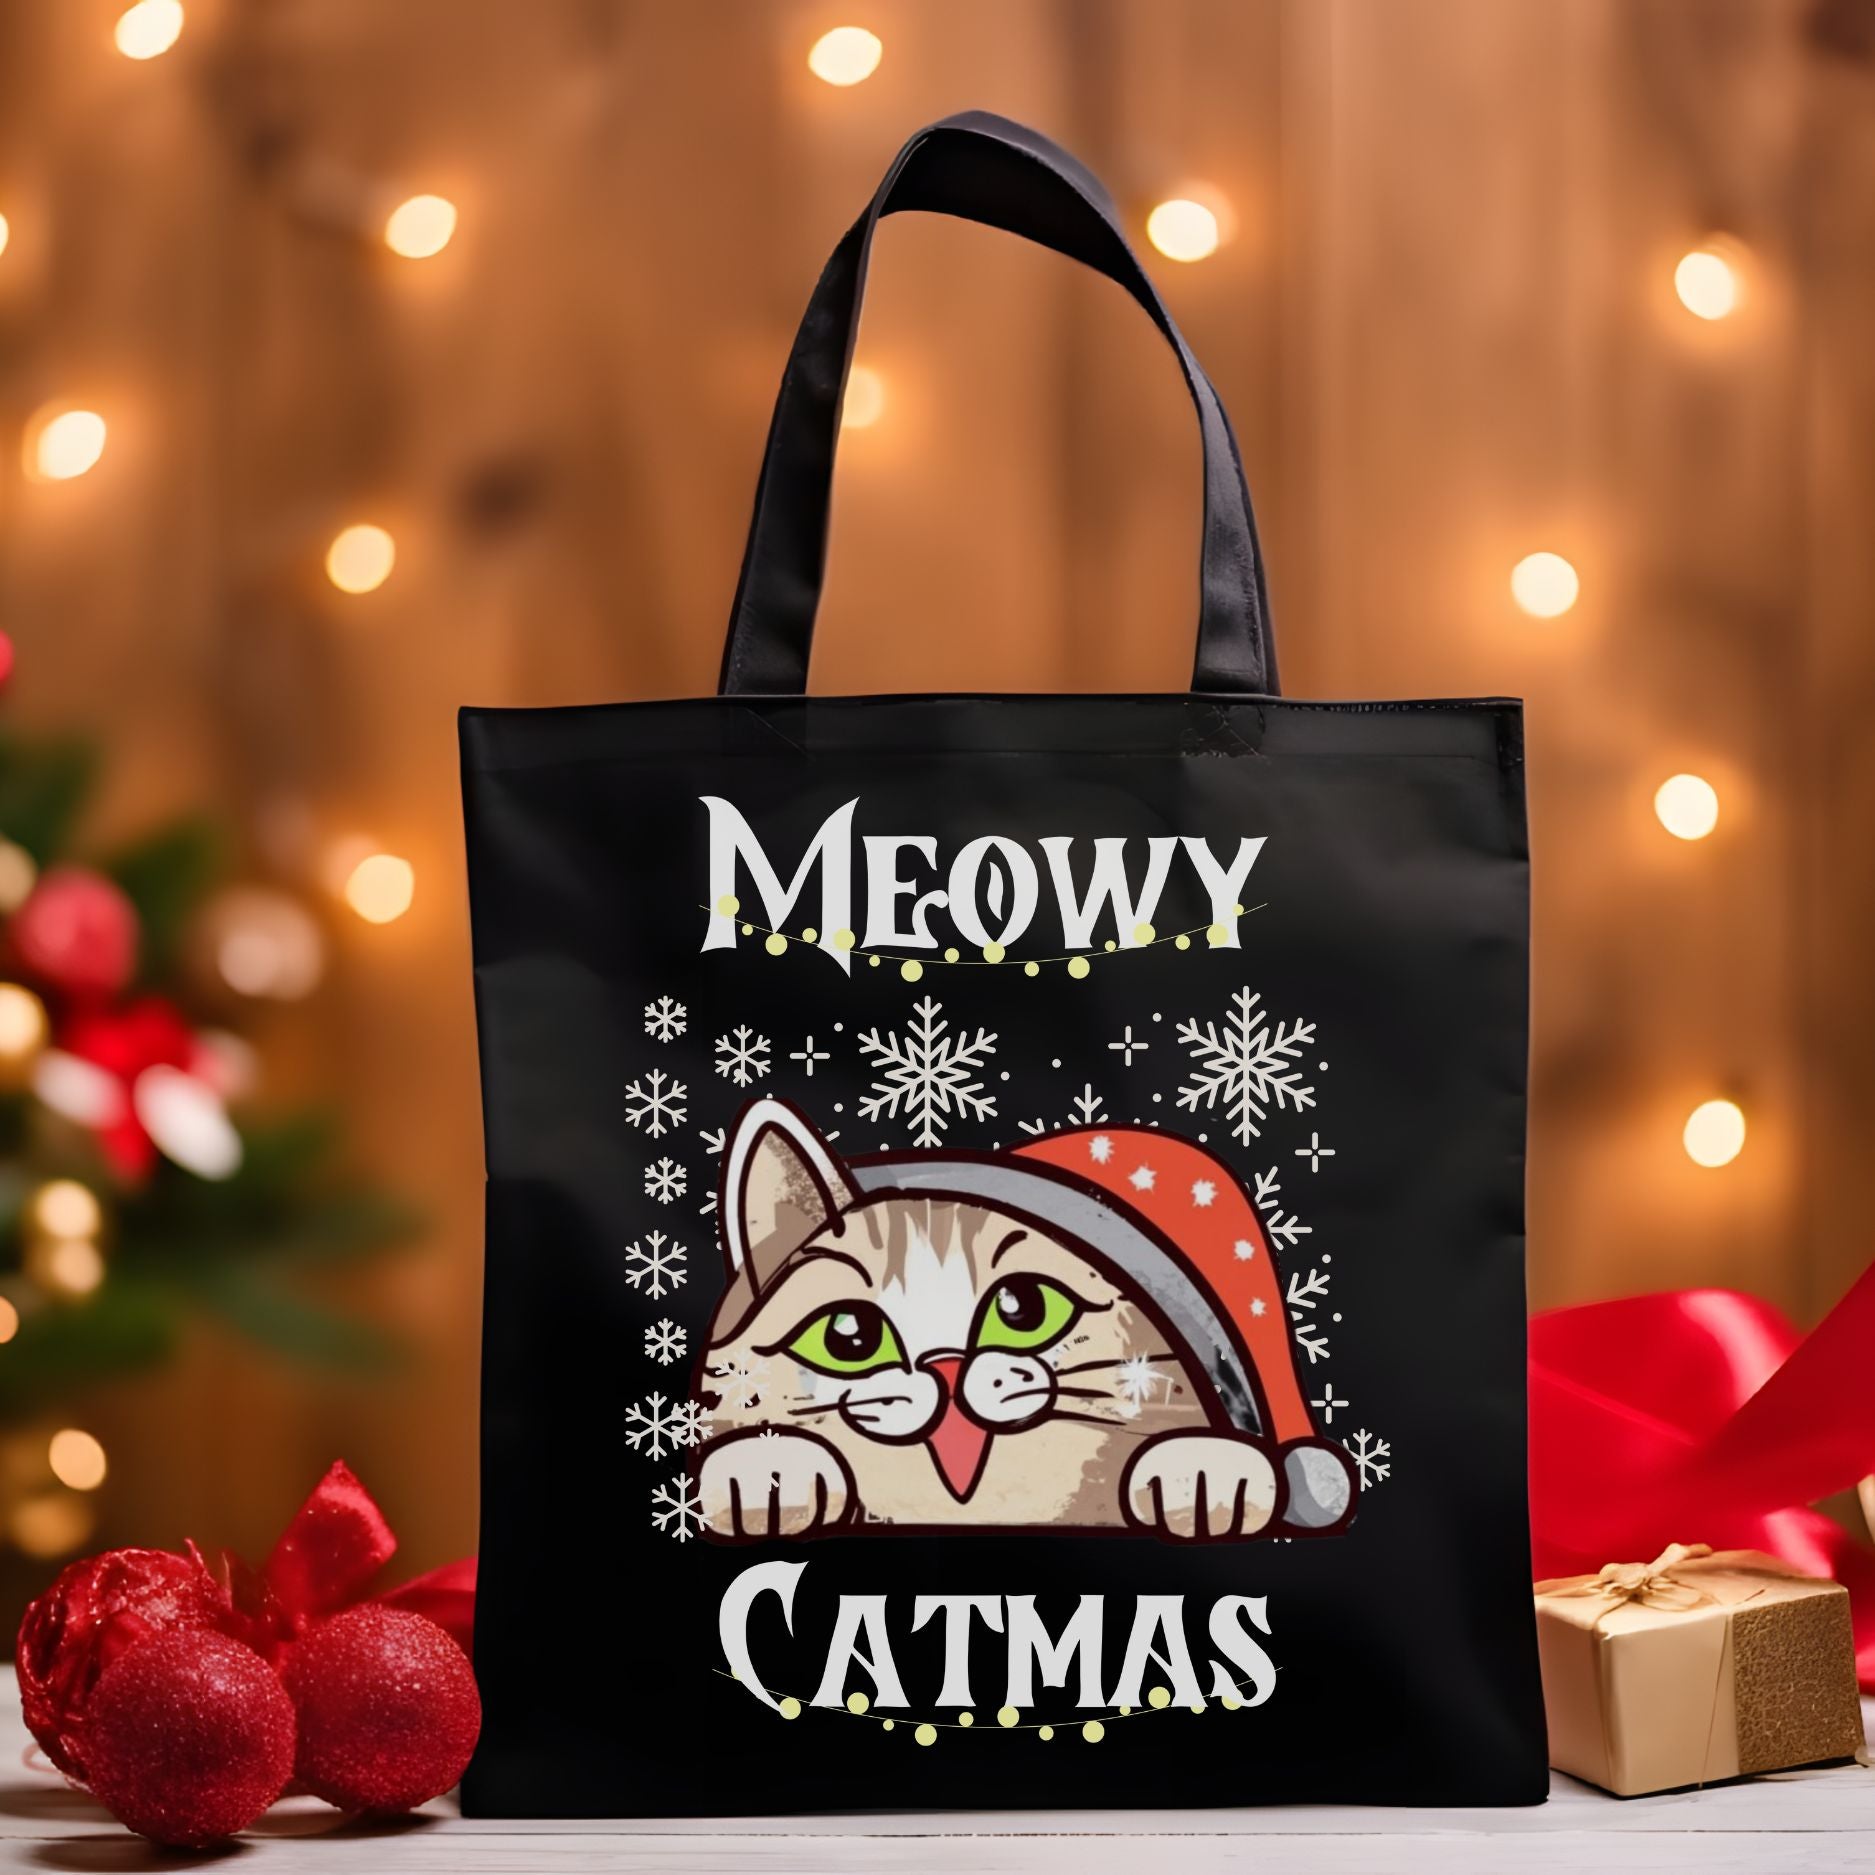 Meowy Catmas Tote Bag - Funny Christmas Cat Totes, Christmas Lights, Snow Cat Design Accessories   